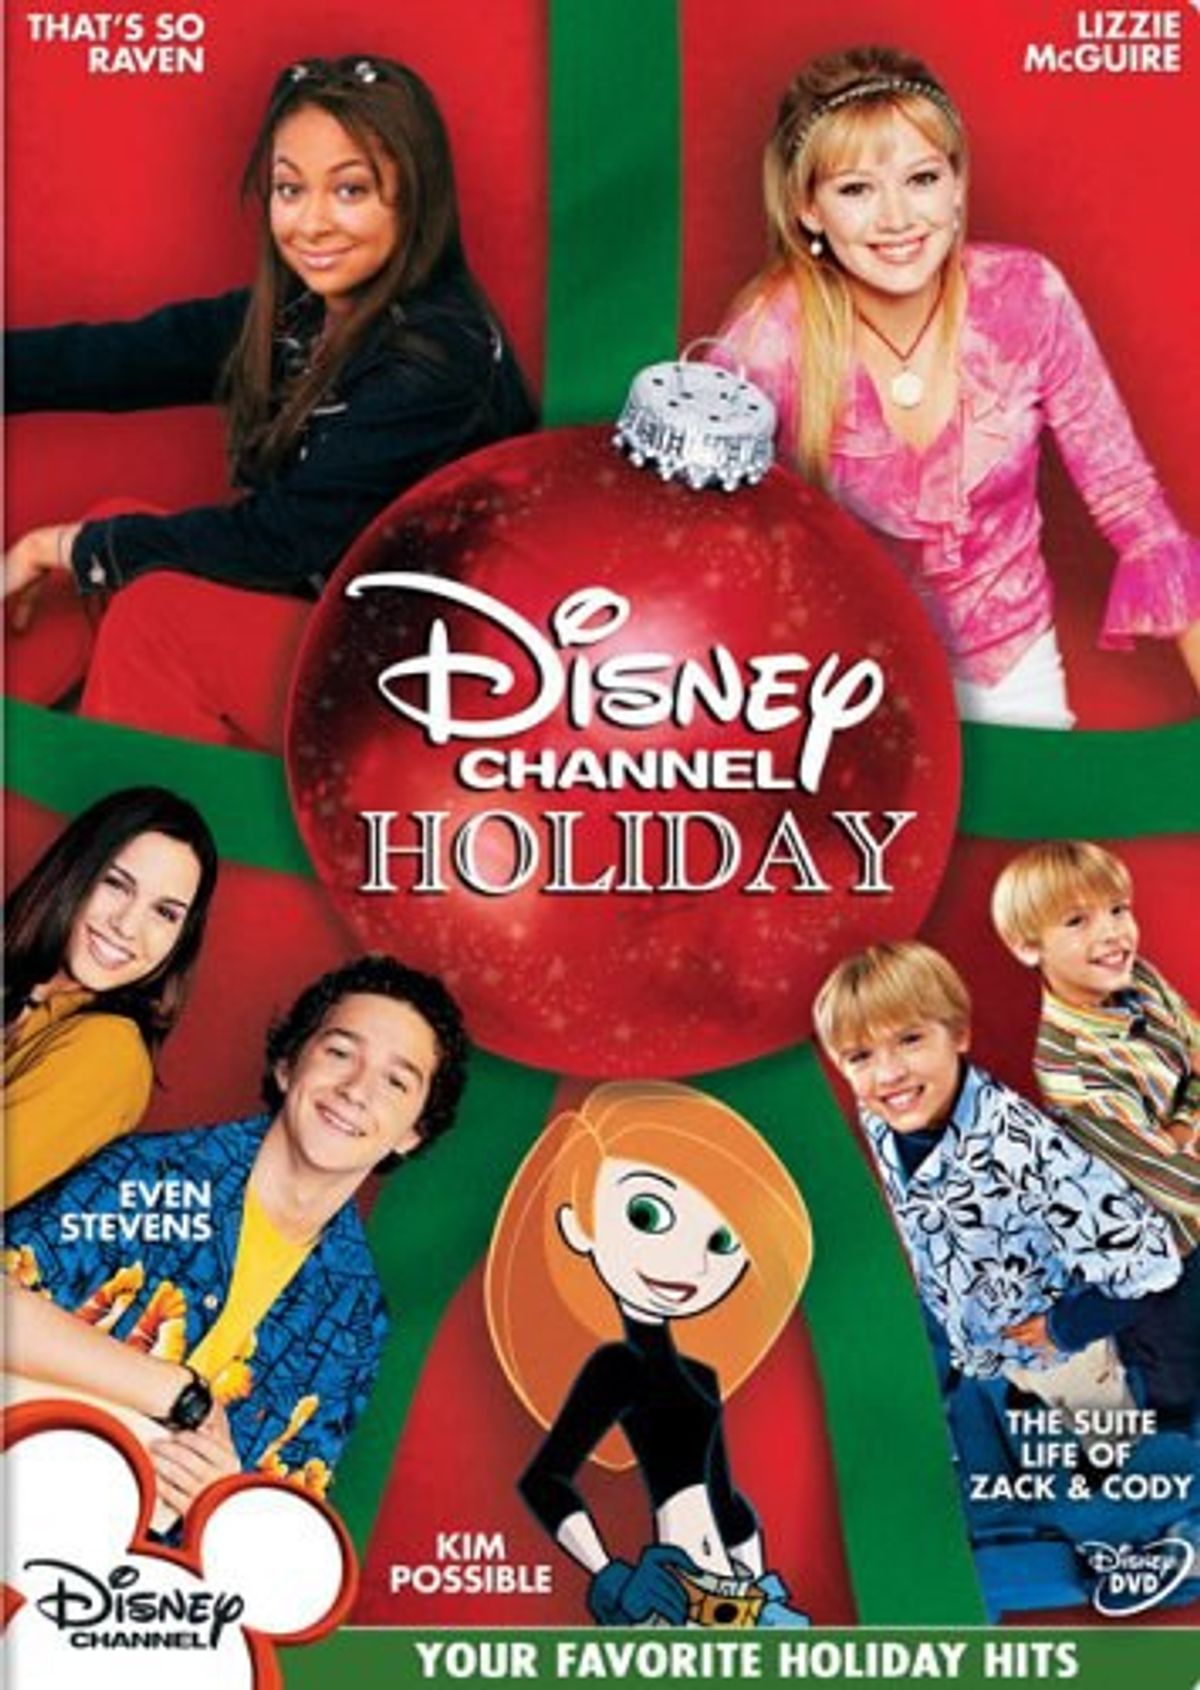 Top 8 Disney Channel Holiday Episodes To Ignore Your Family To